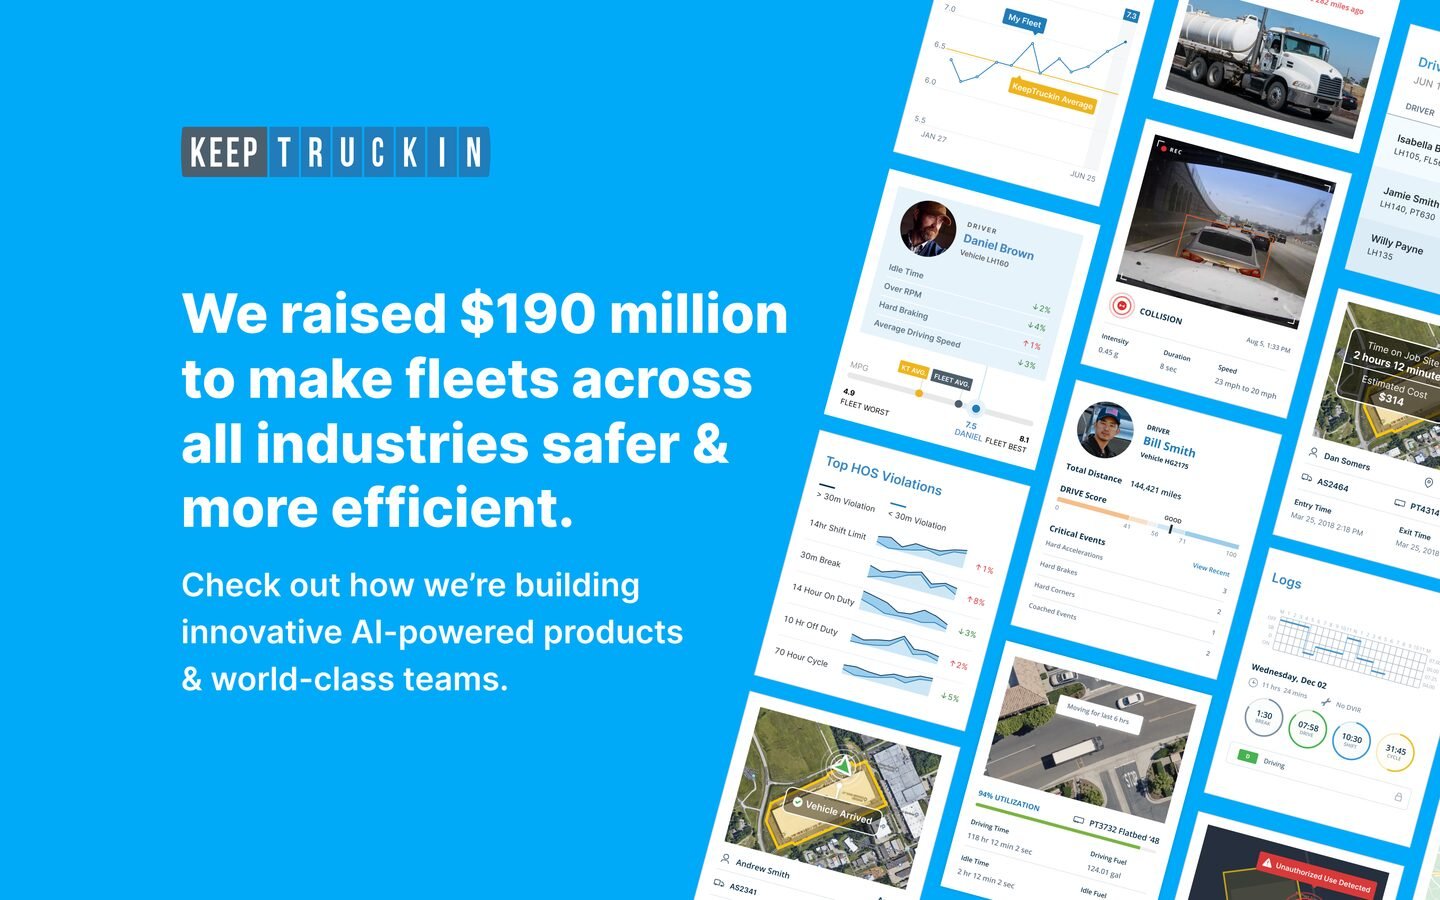 KeepTruckin raises $190 million to invest in AI products, double R&D team to 700